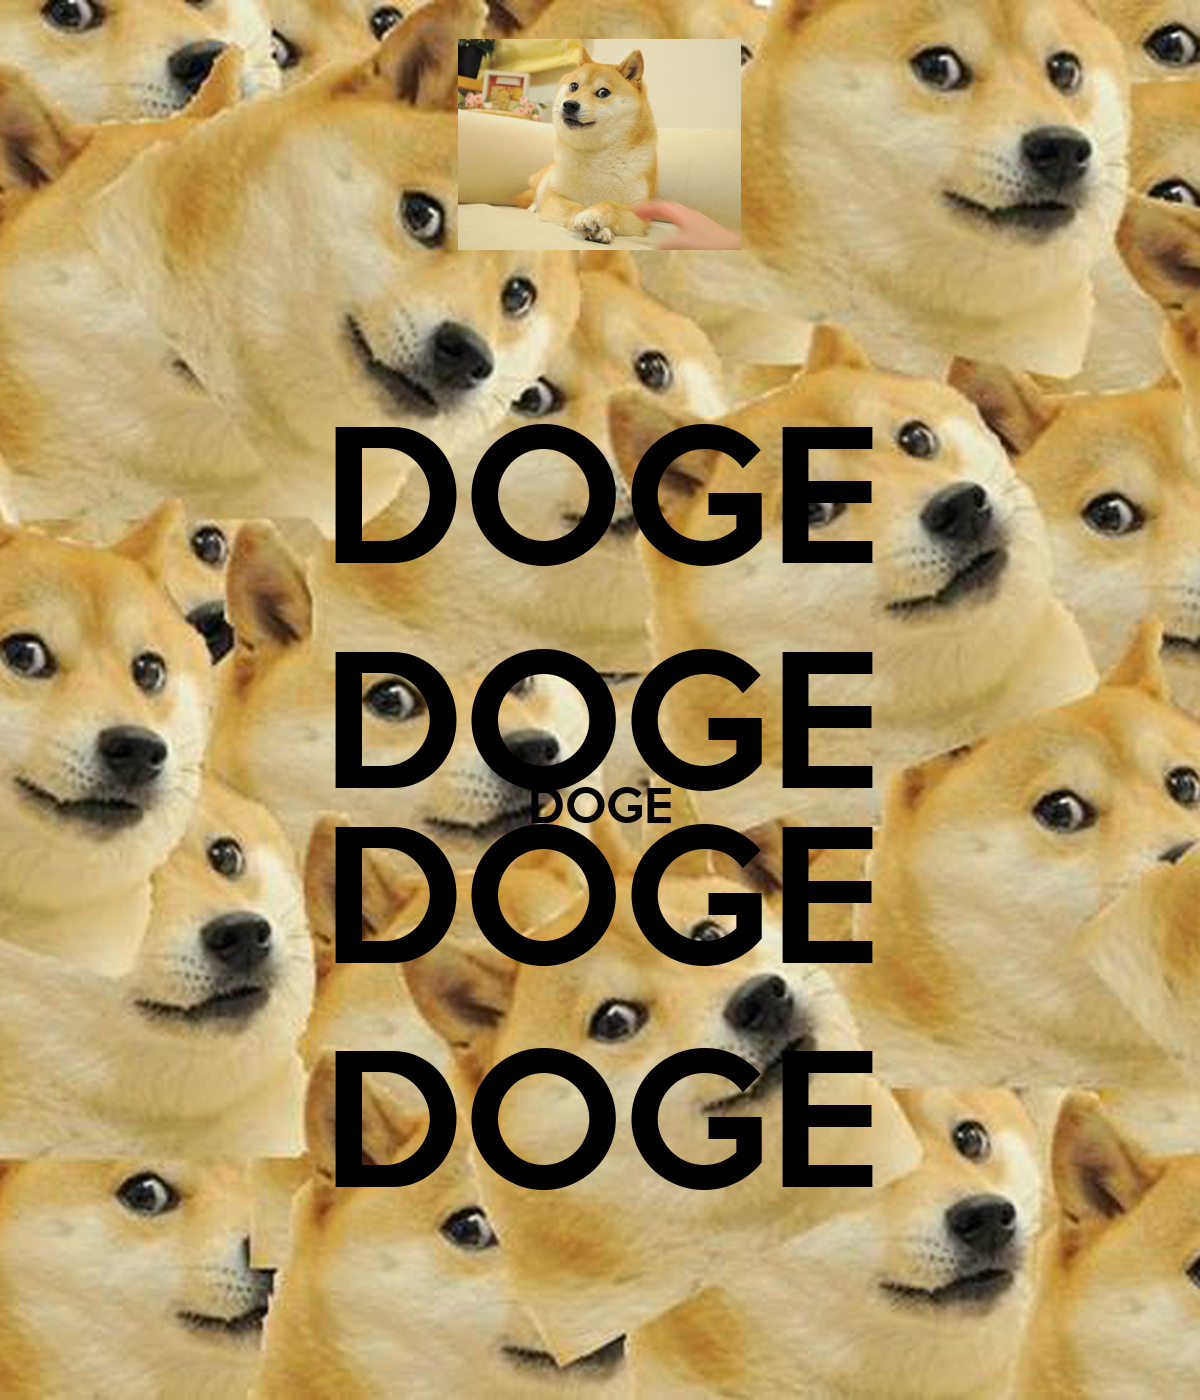 Doge IPhone 5 Wallpaper. My Sims 3 Downloads